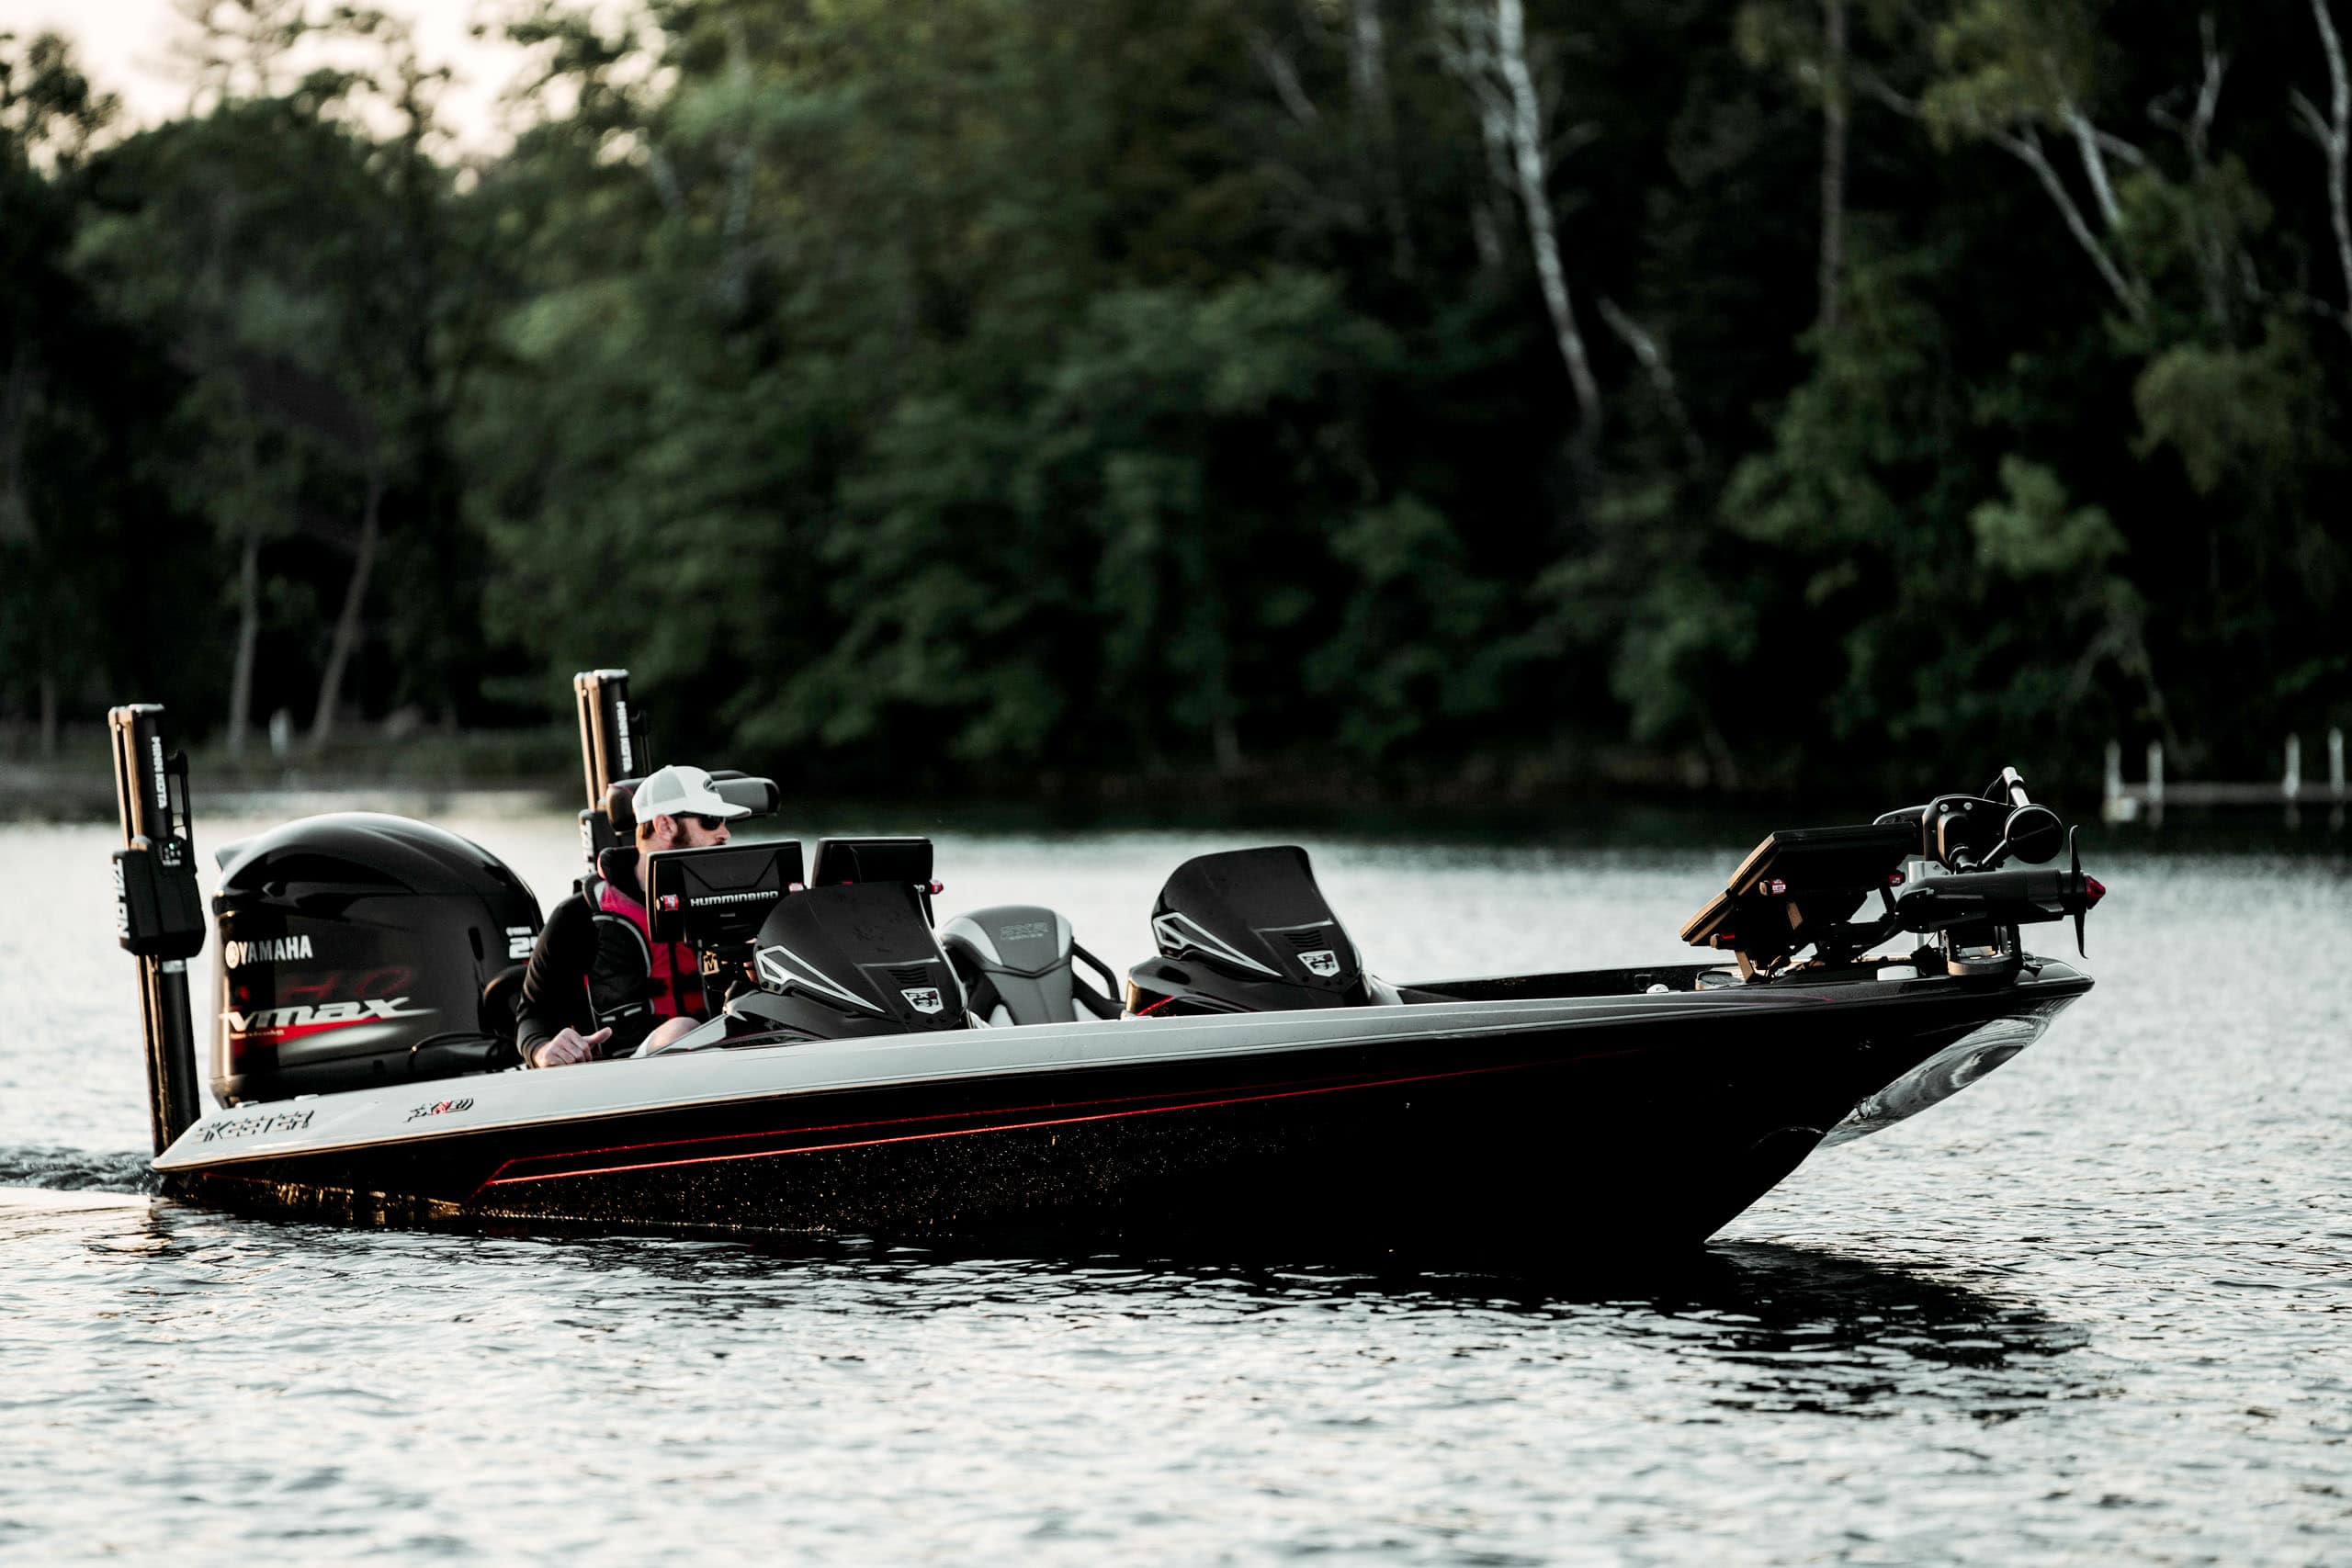 Brian Robison Driving His Bass Boat